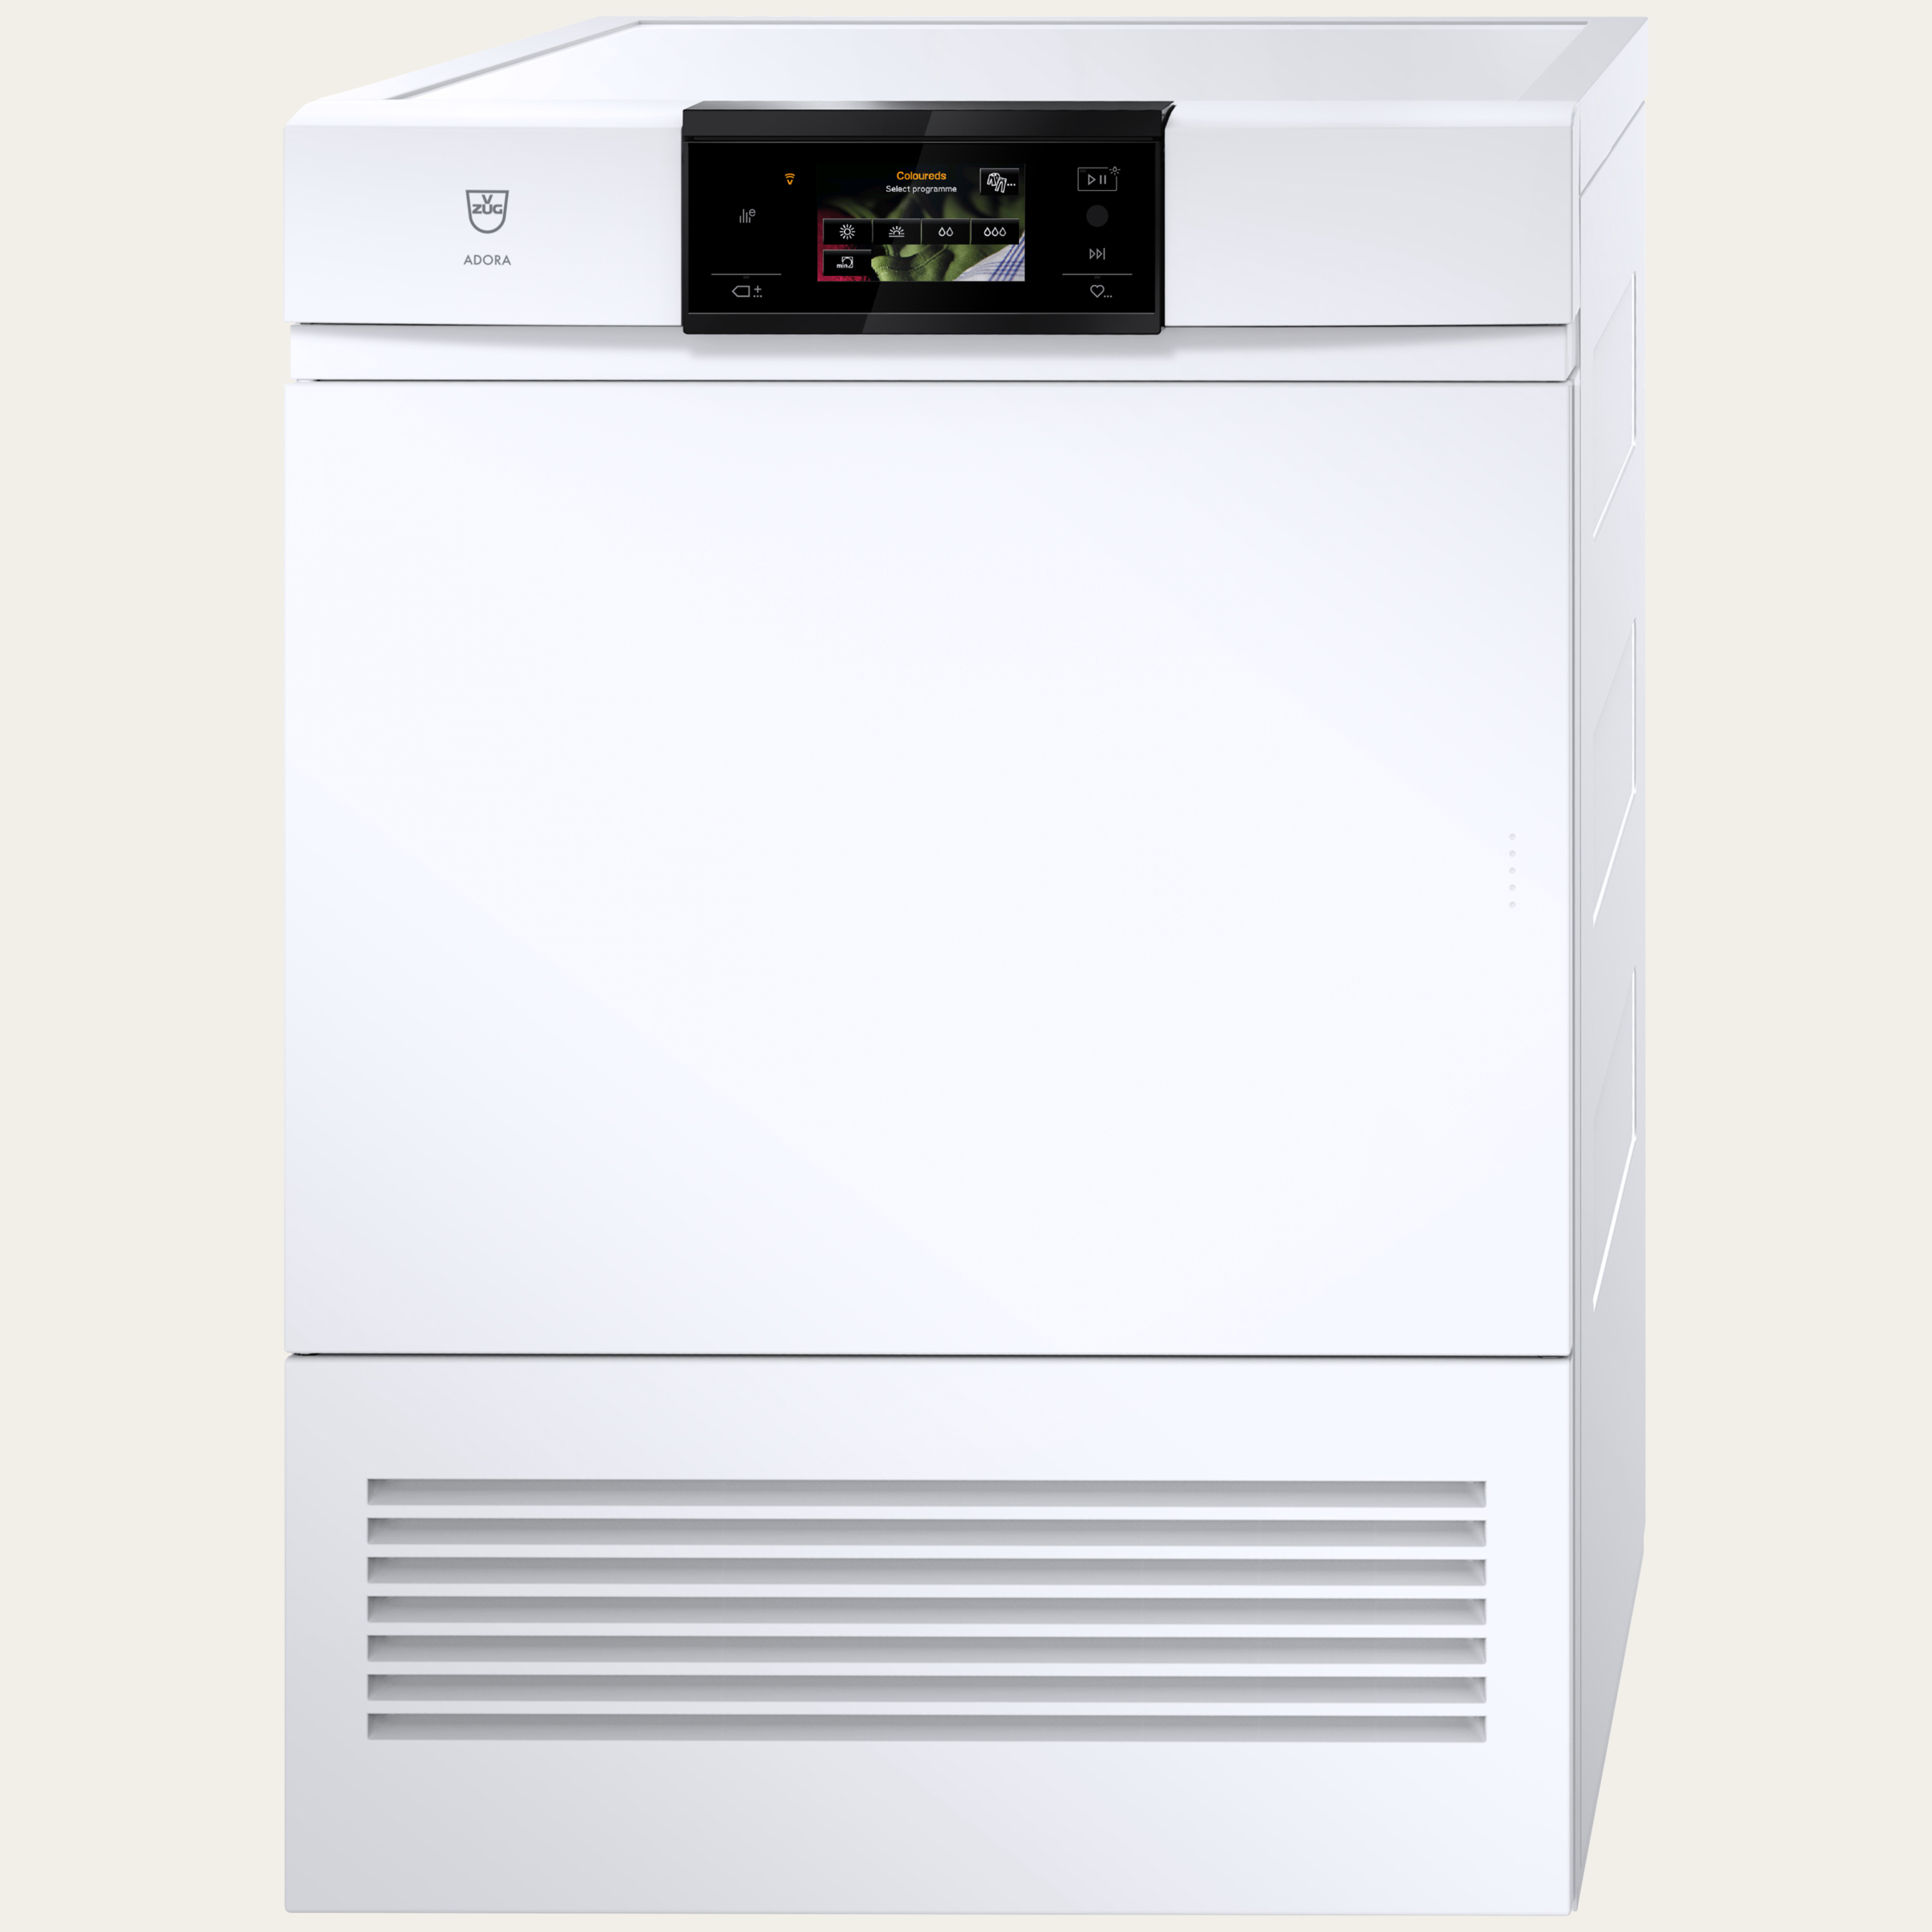 V-ZUG Tumble dryer AdoraDry V2000, Door hinge: Right, Nominal capacity: 7 kg, Full-colour graphic display, touchscreen